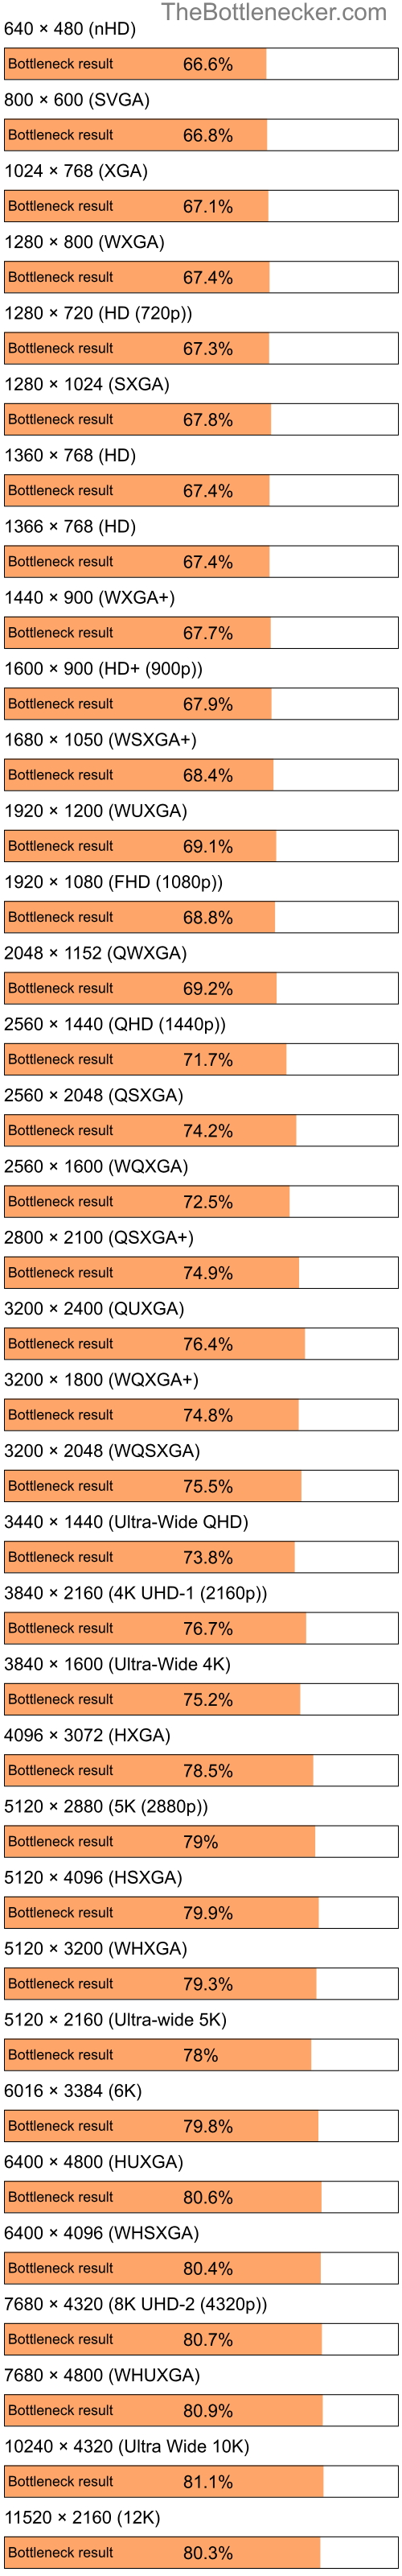 Bottleneck results by resolution for Intel Atom Z520 and AMD Radeon X700 in General Tasks